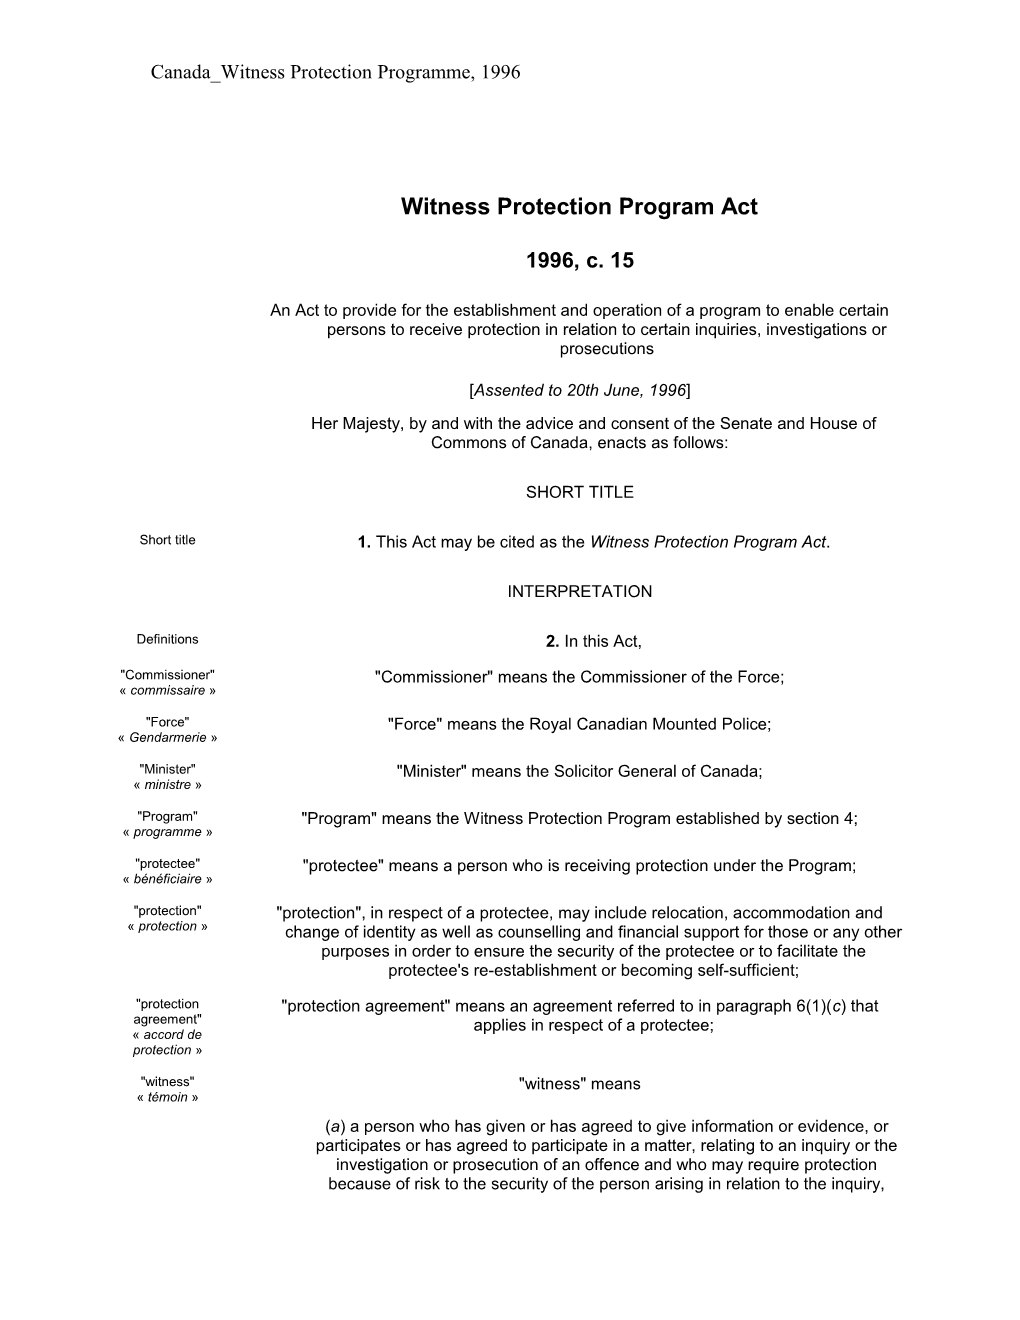 Witness Protection Program Act